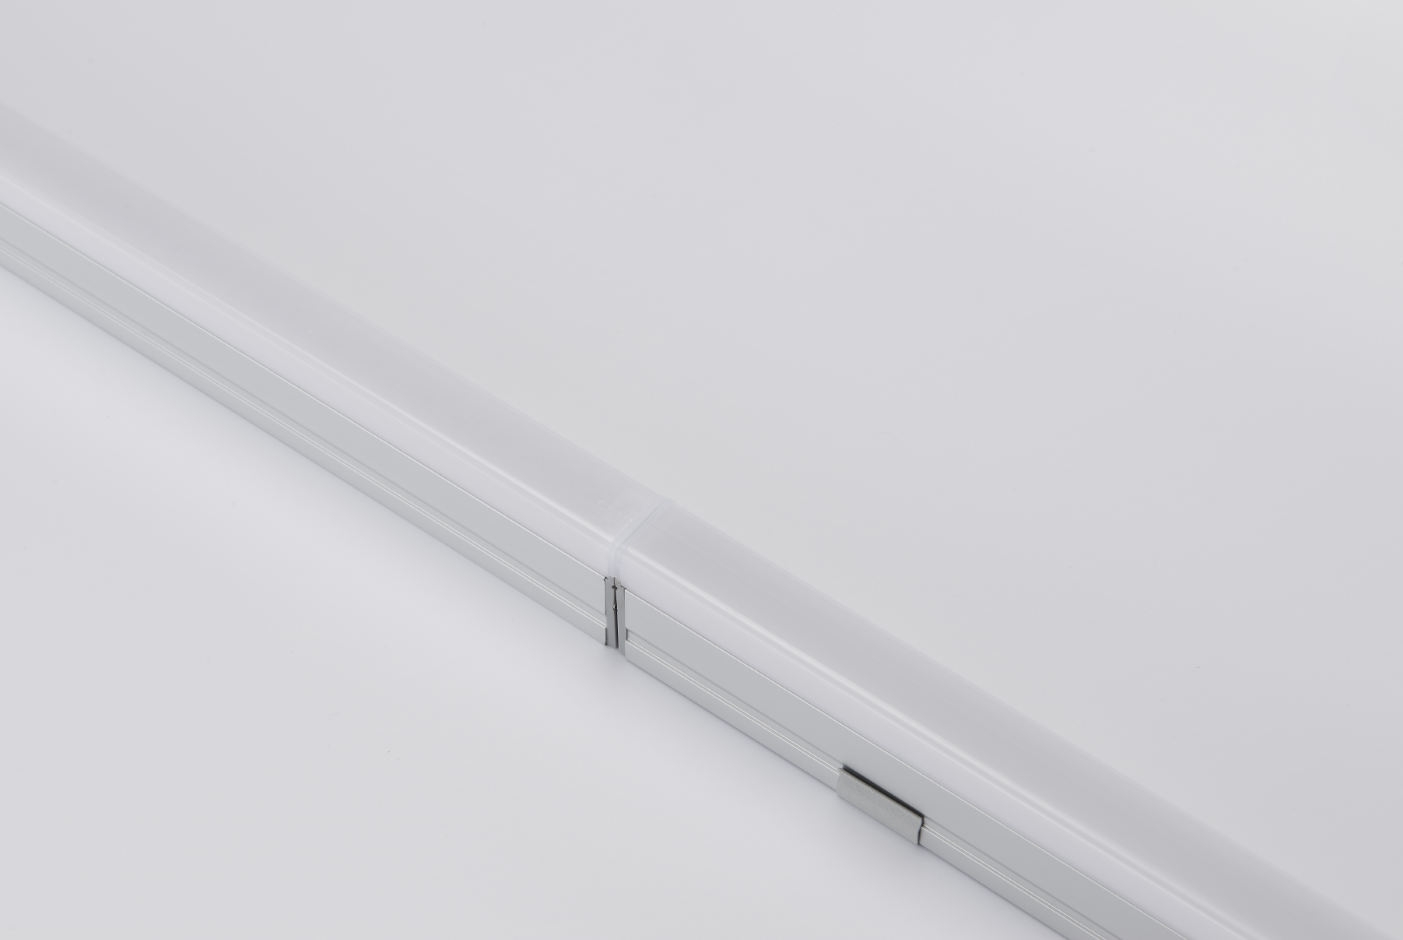 RH-C26 12W IP67 LED Aluminium Profile 10mm Thickness Opal PMMA Diffuser No Darkness Outdoor Linear Lights